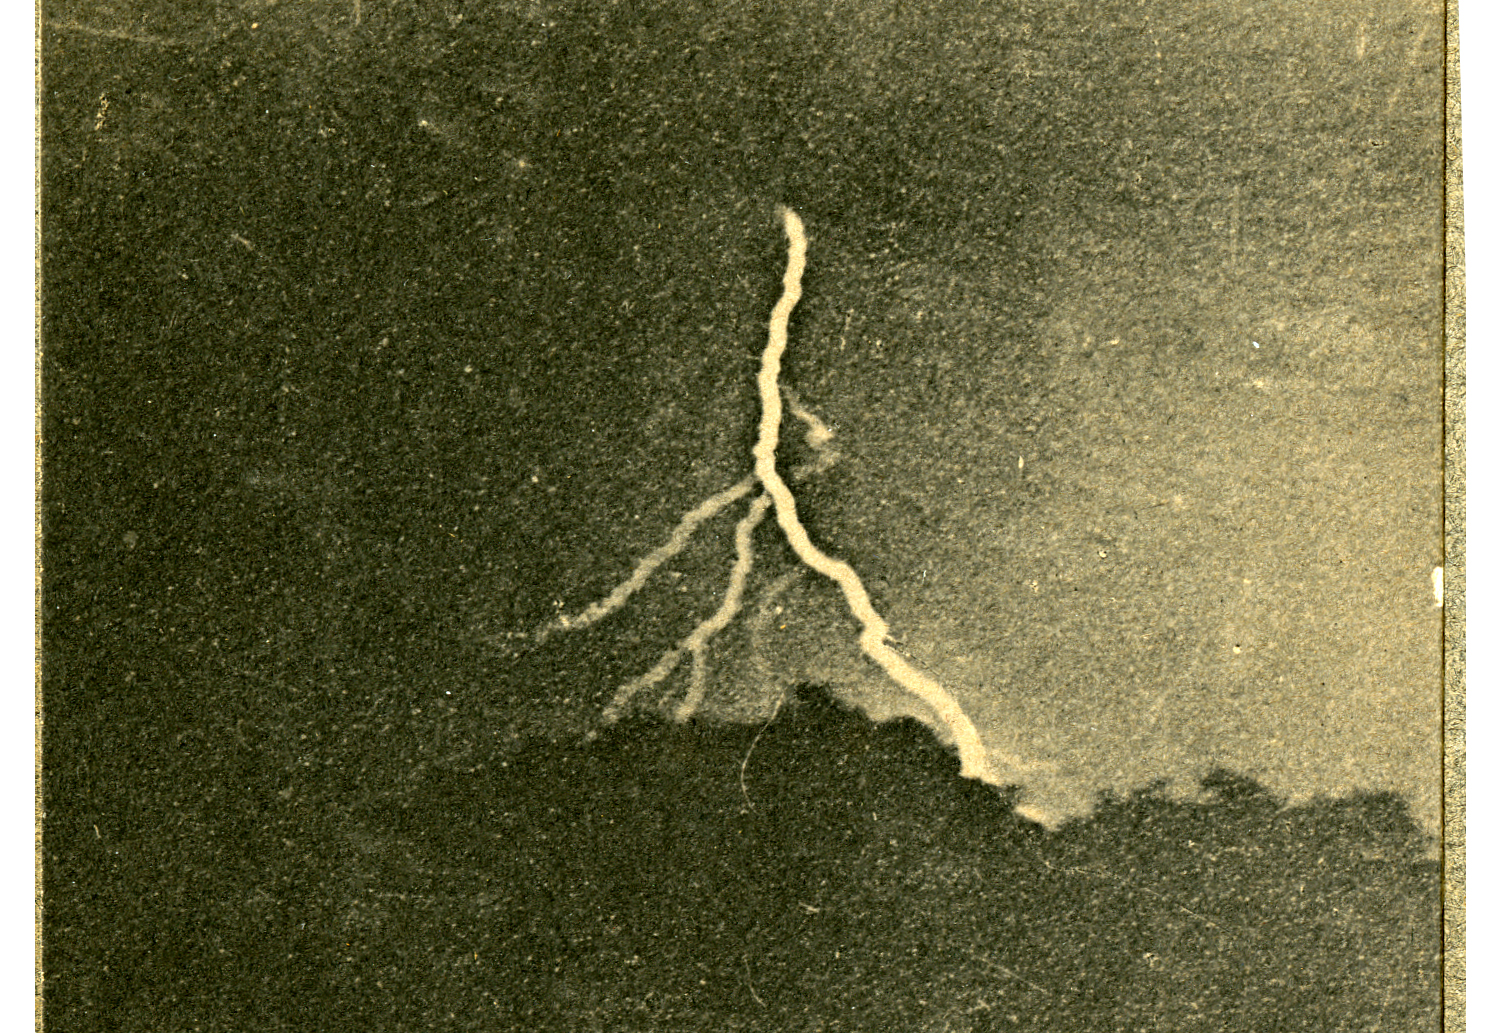 Photo: William N. Jennings’ First Photograph of Lightning, 1882. From the Historical and Interpretive Collections of The Franklin Institute.